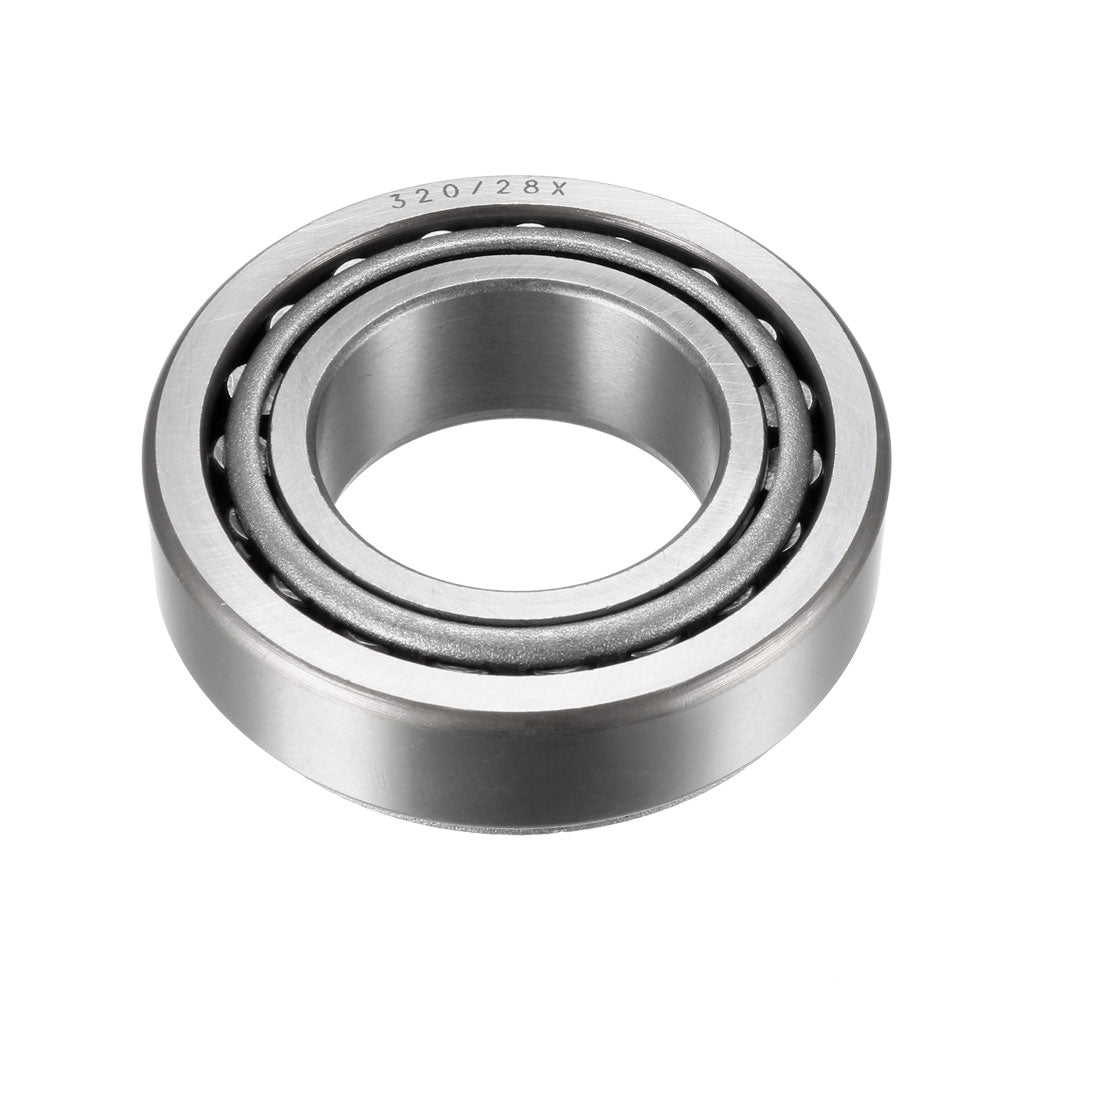 uxcell Uxcell 320/28X Tapered Roller Bearing Cone and Cup Set 28mm Bore 52mm O.D. 16mm Width